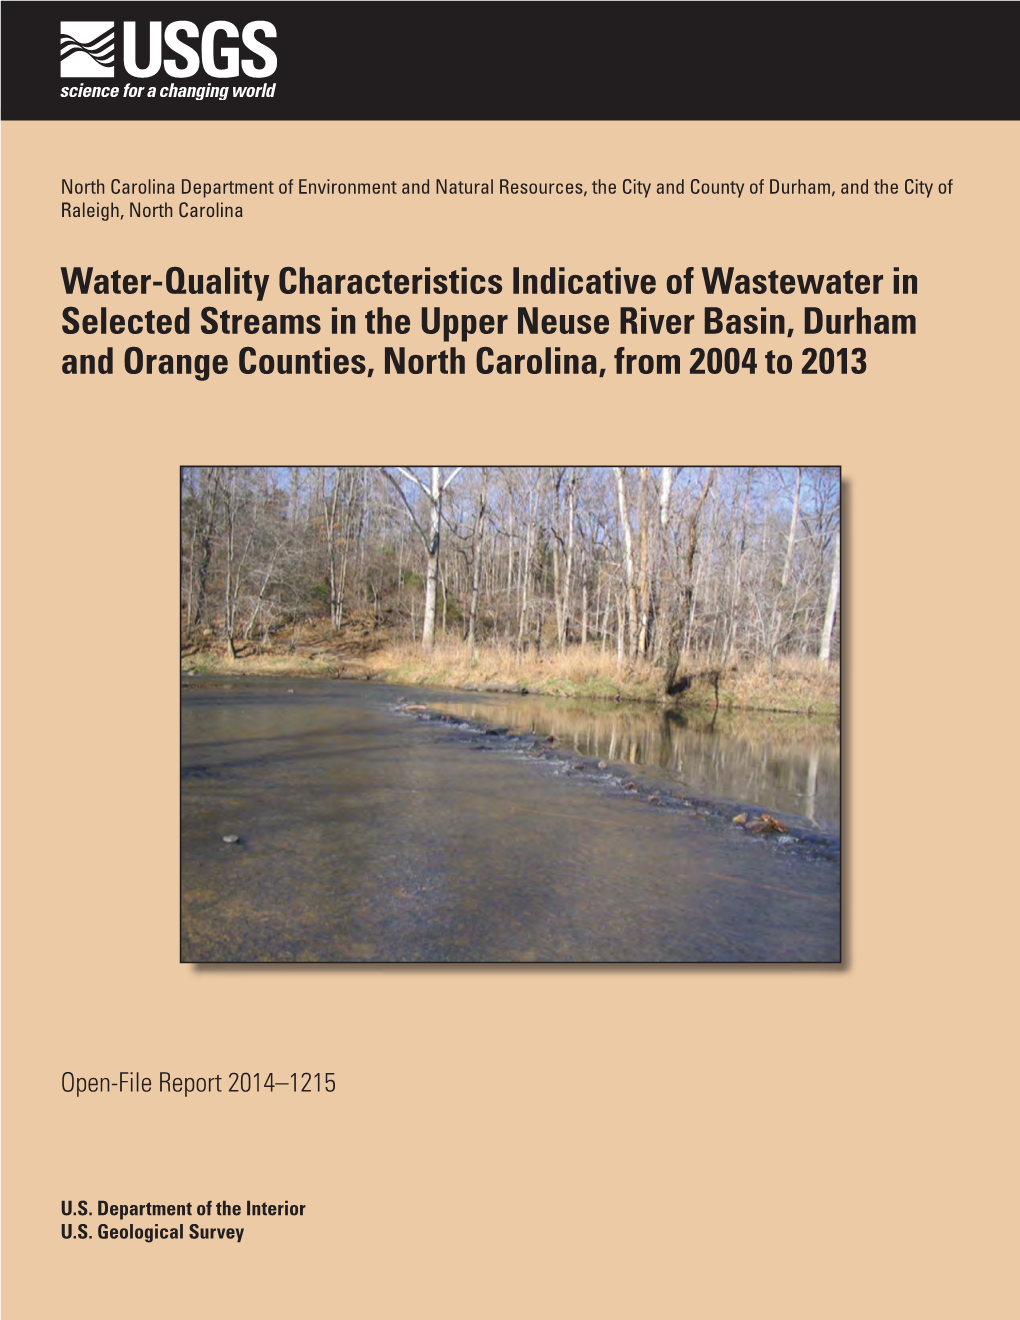 Water-Quality Characteristics Indicative of Wastewater in Selected Streams in the Upper Neuse River Basin, Durham and Orange